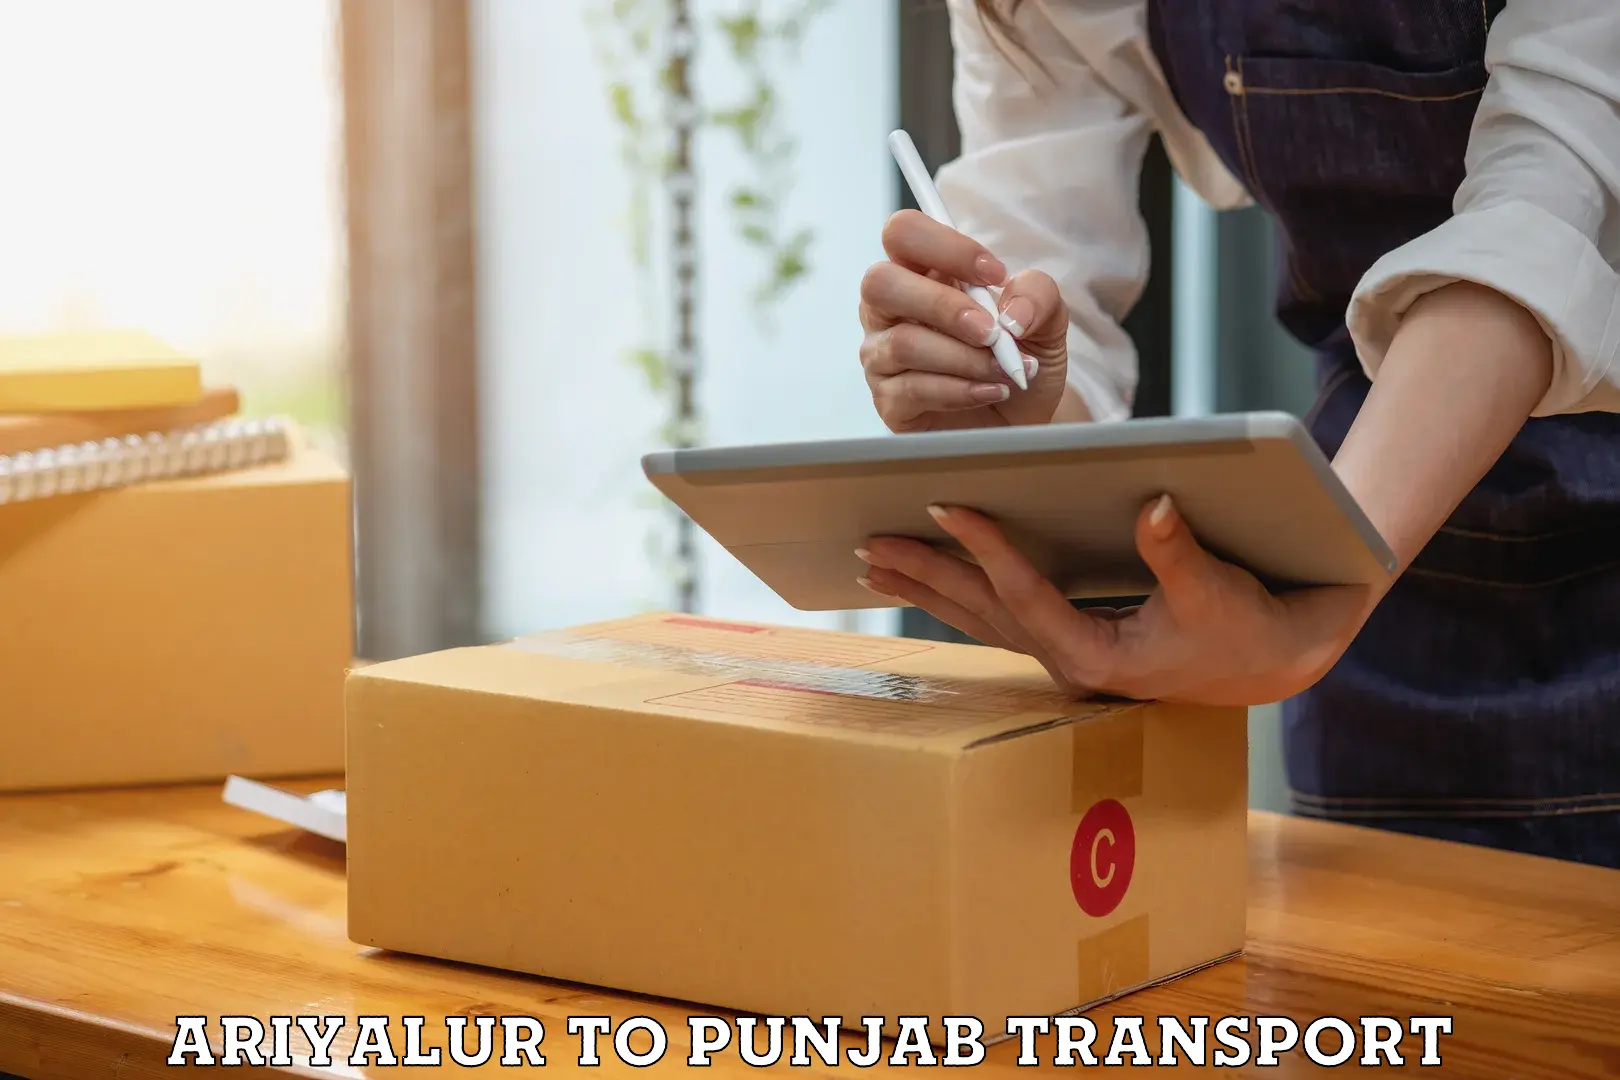 Air freight transport services Ariyalur to Patiala